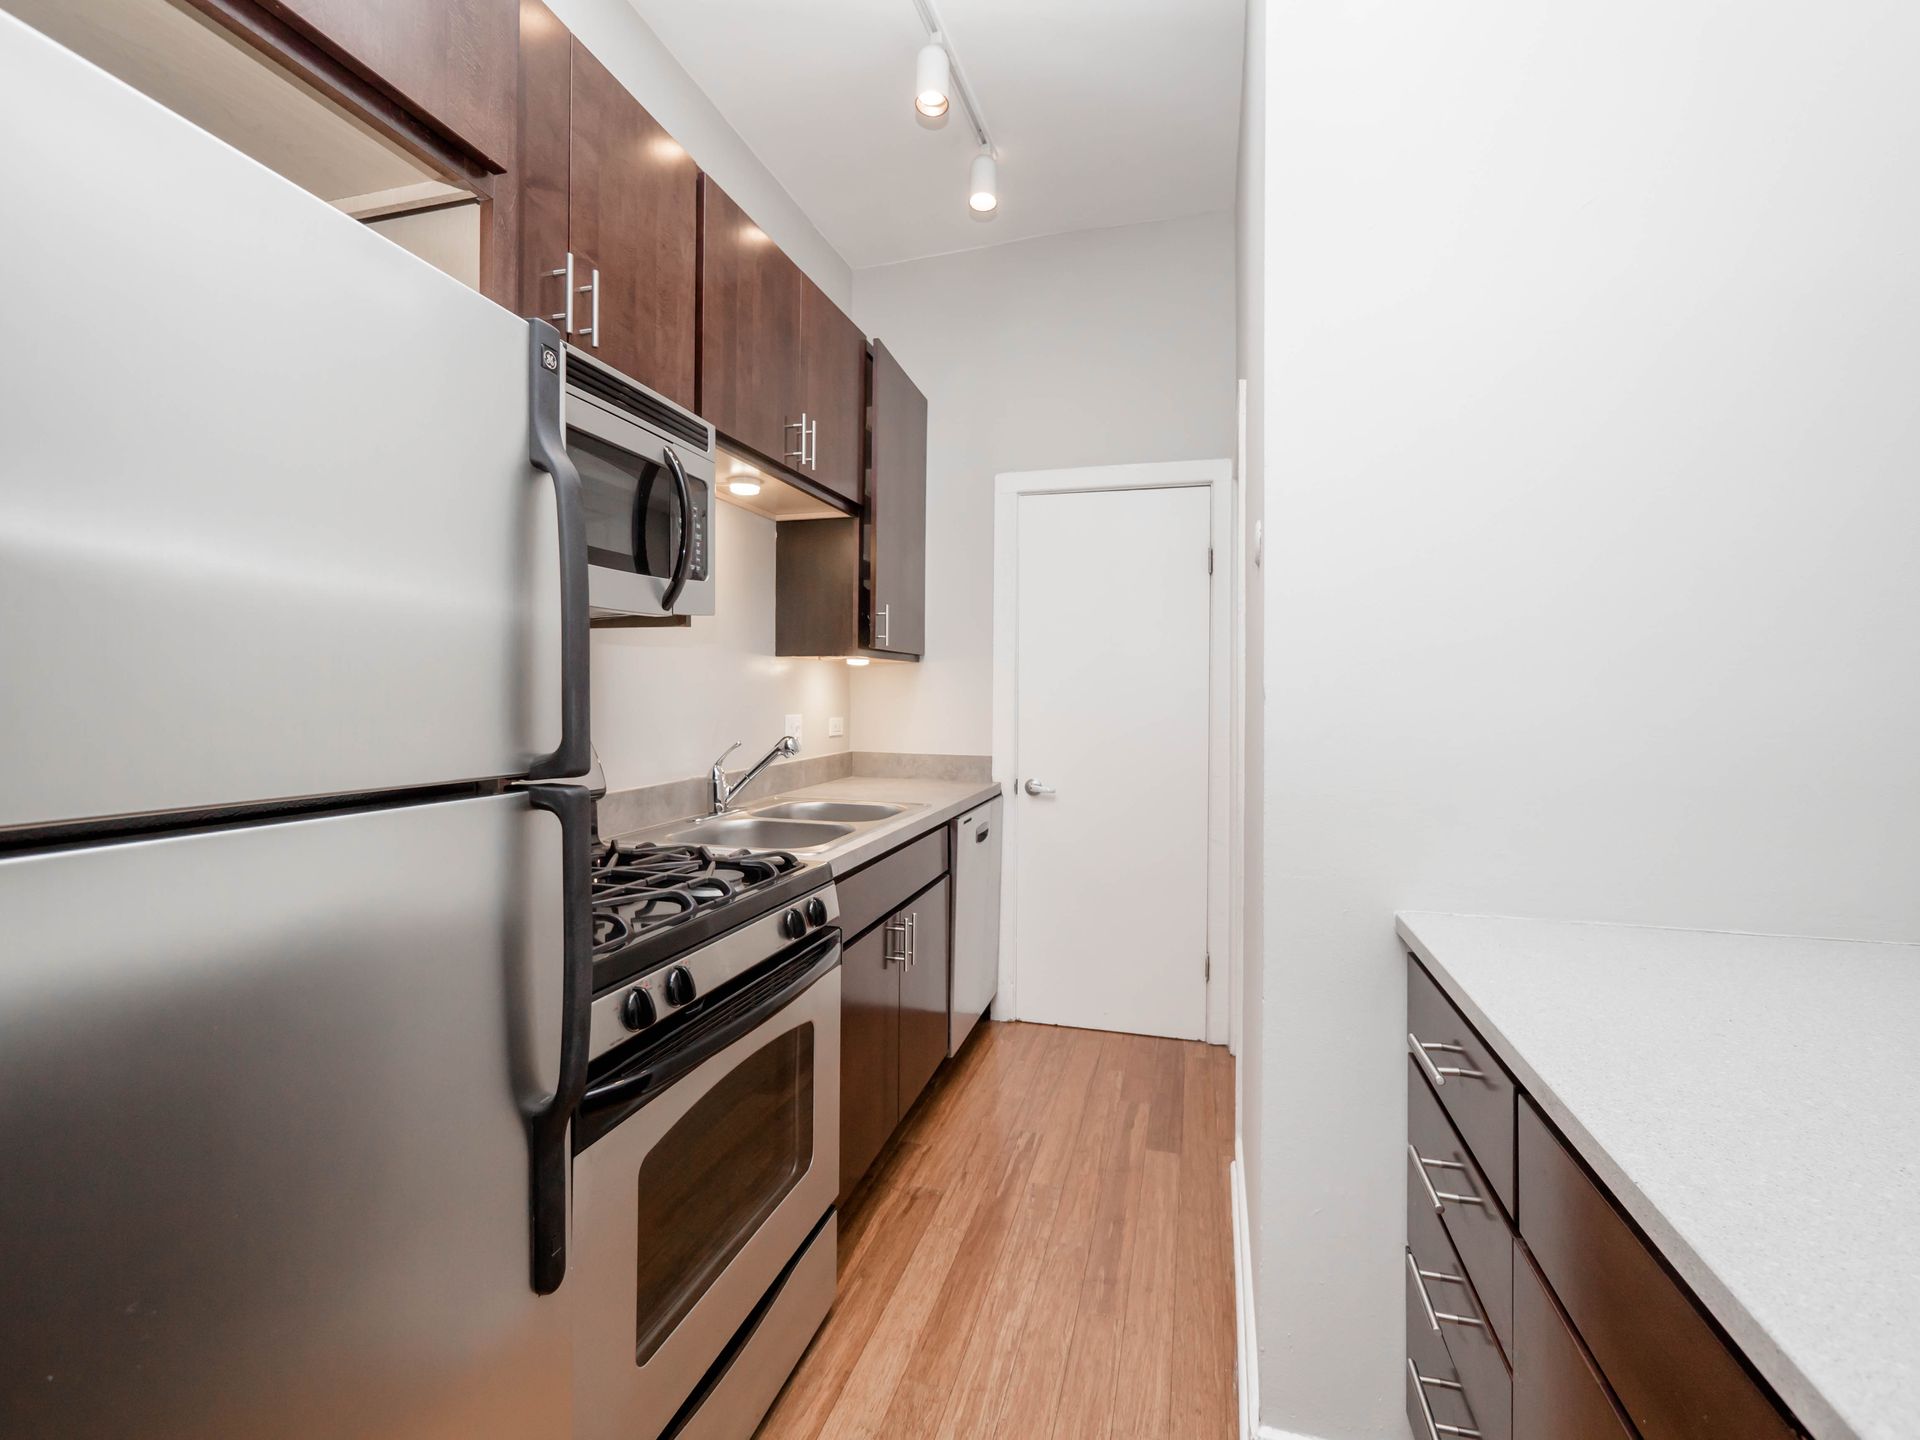 Apartment kitchen with stainless steel appliances and wooden cabinets at Reside on Clark.